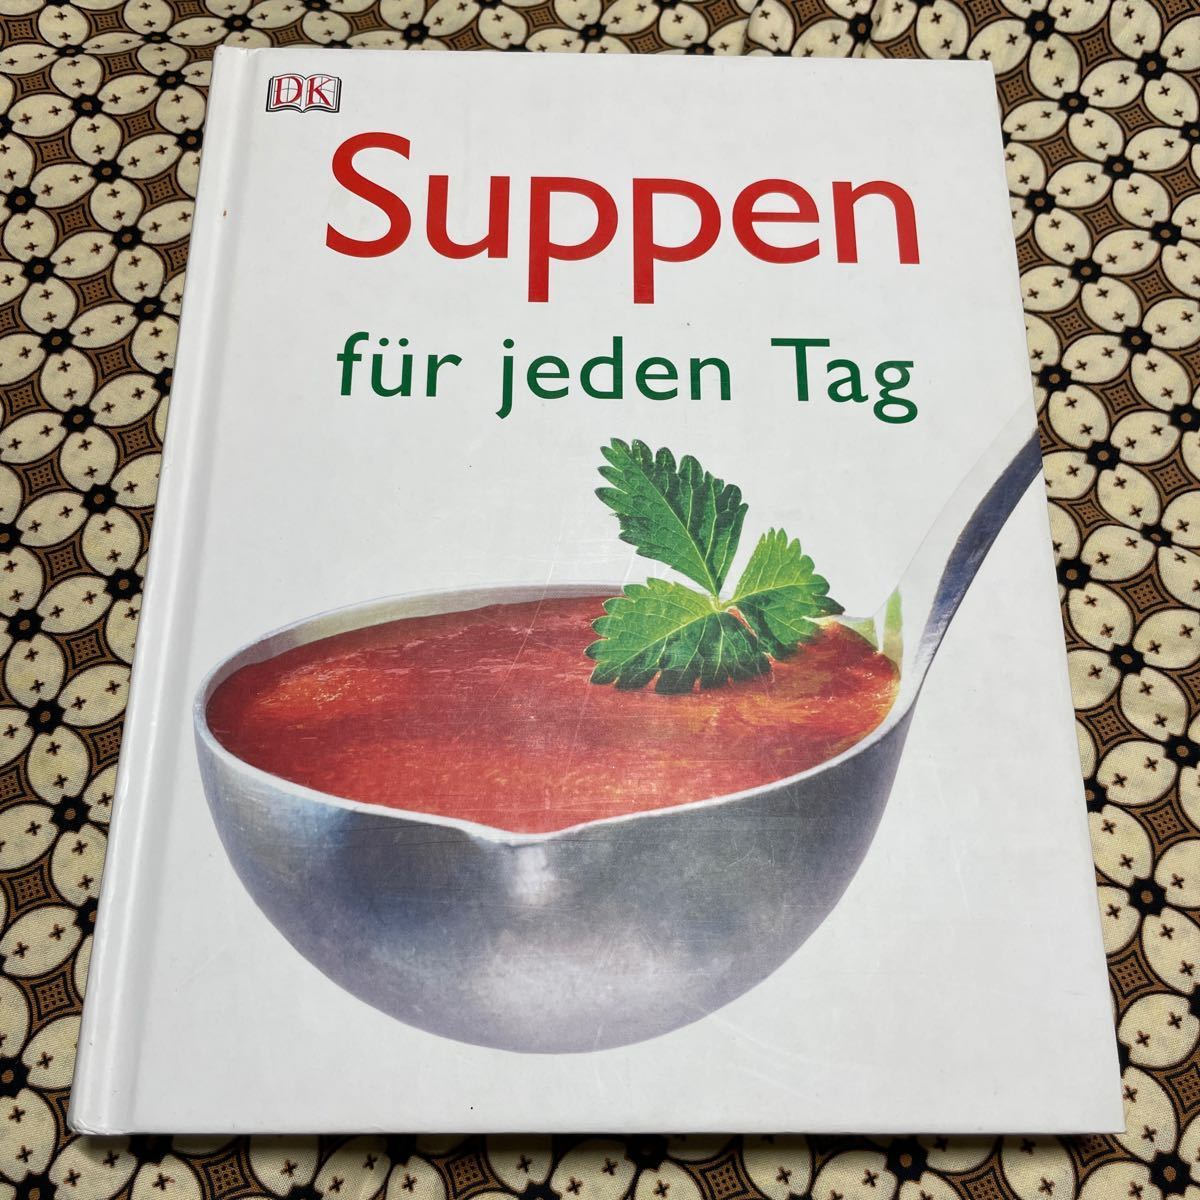 Suppen fur jeden Tag ドイツ語版　スープ　レシピ　洋書　独語